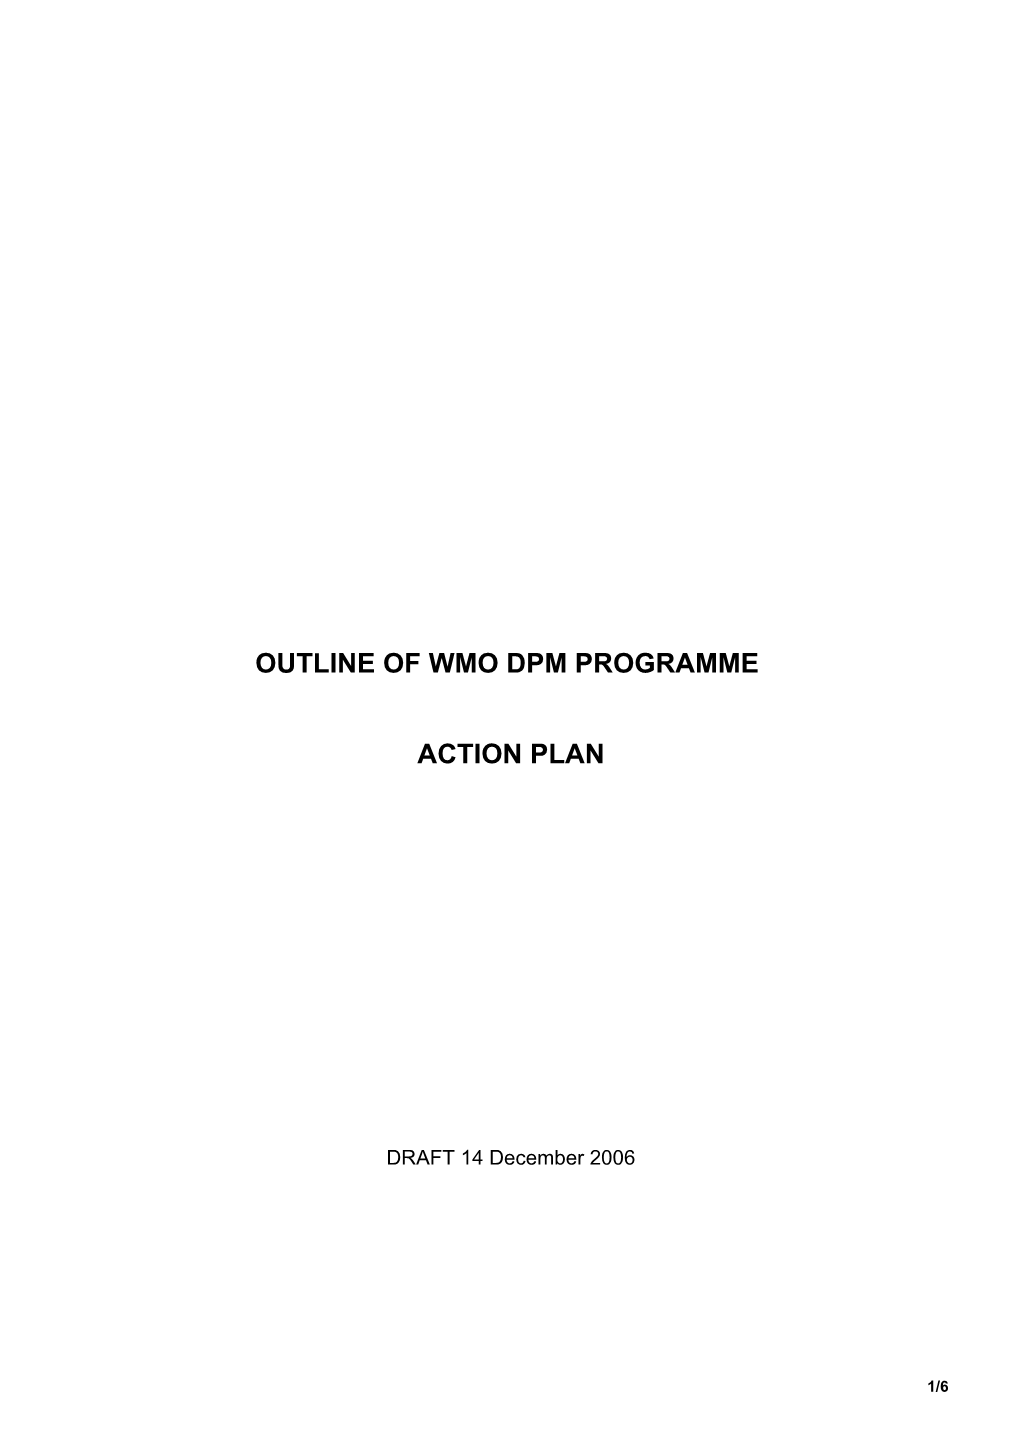 Outline of Wmo Dpm Programme